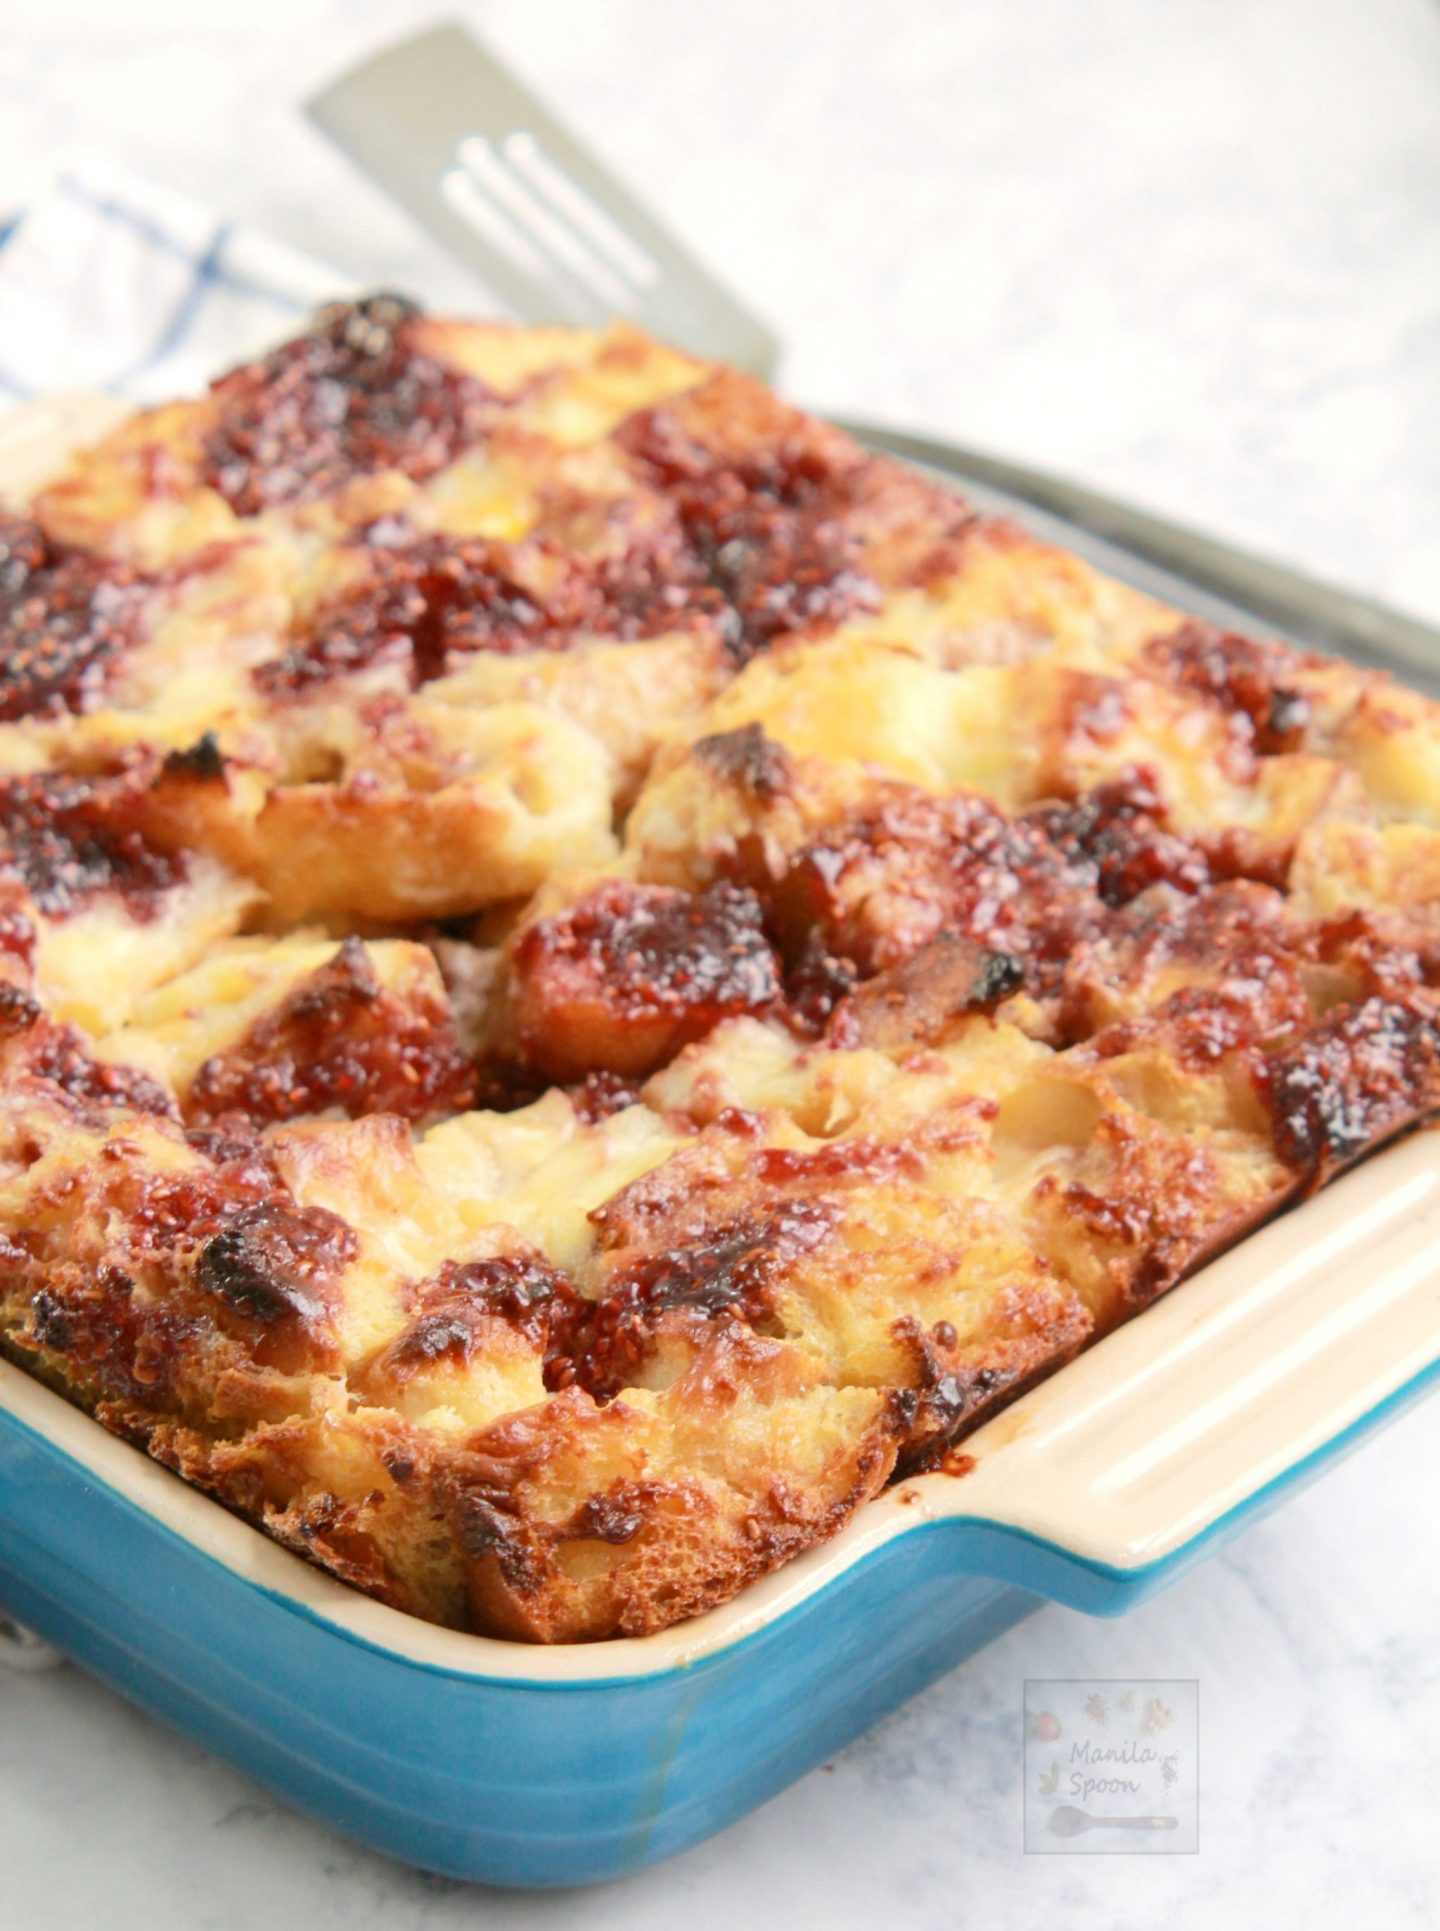 Such a show-stopping breakfast or dessert - this delicious bread pudding is loaded with creamy mascarpone cheese and strawberry jam. For a different spin - use fresh berries that are in season! So good!